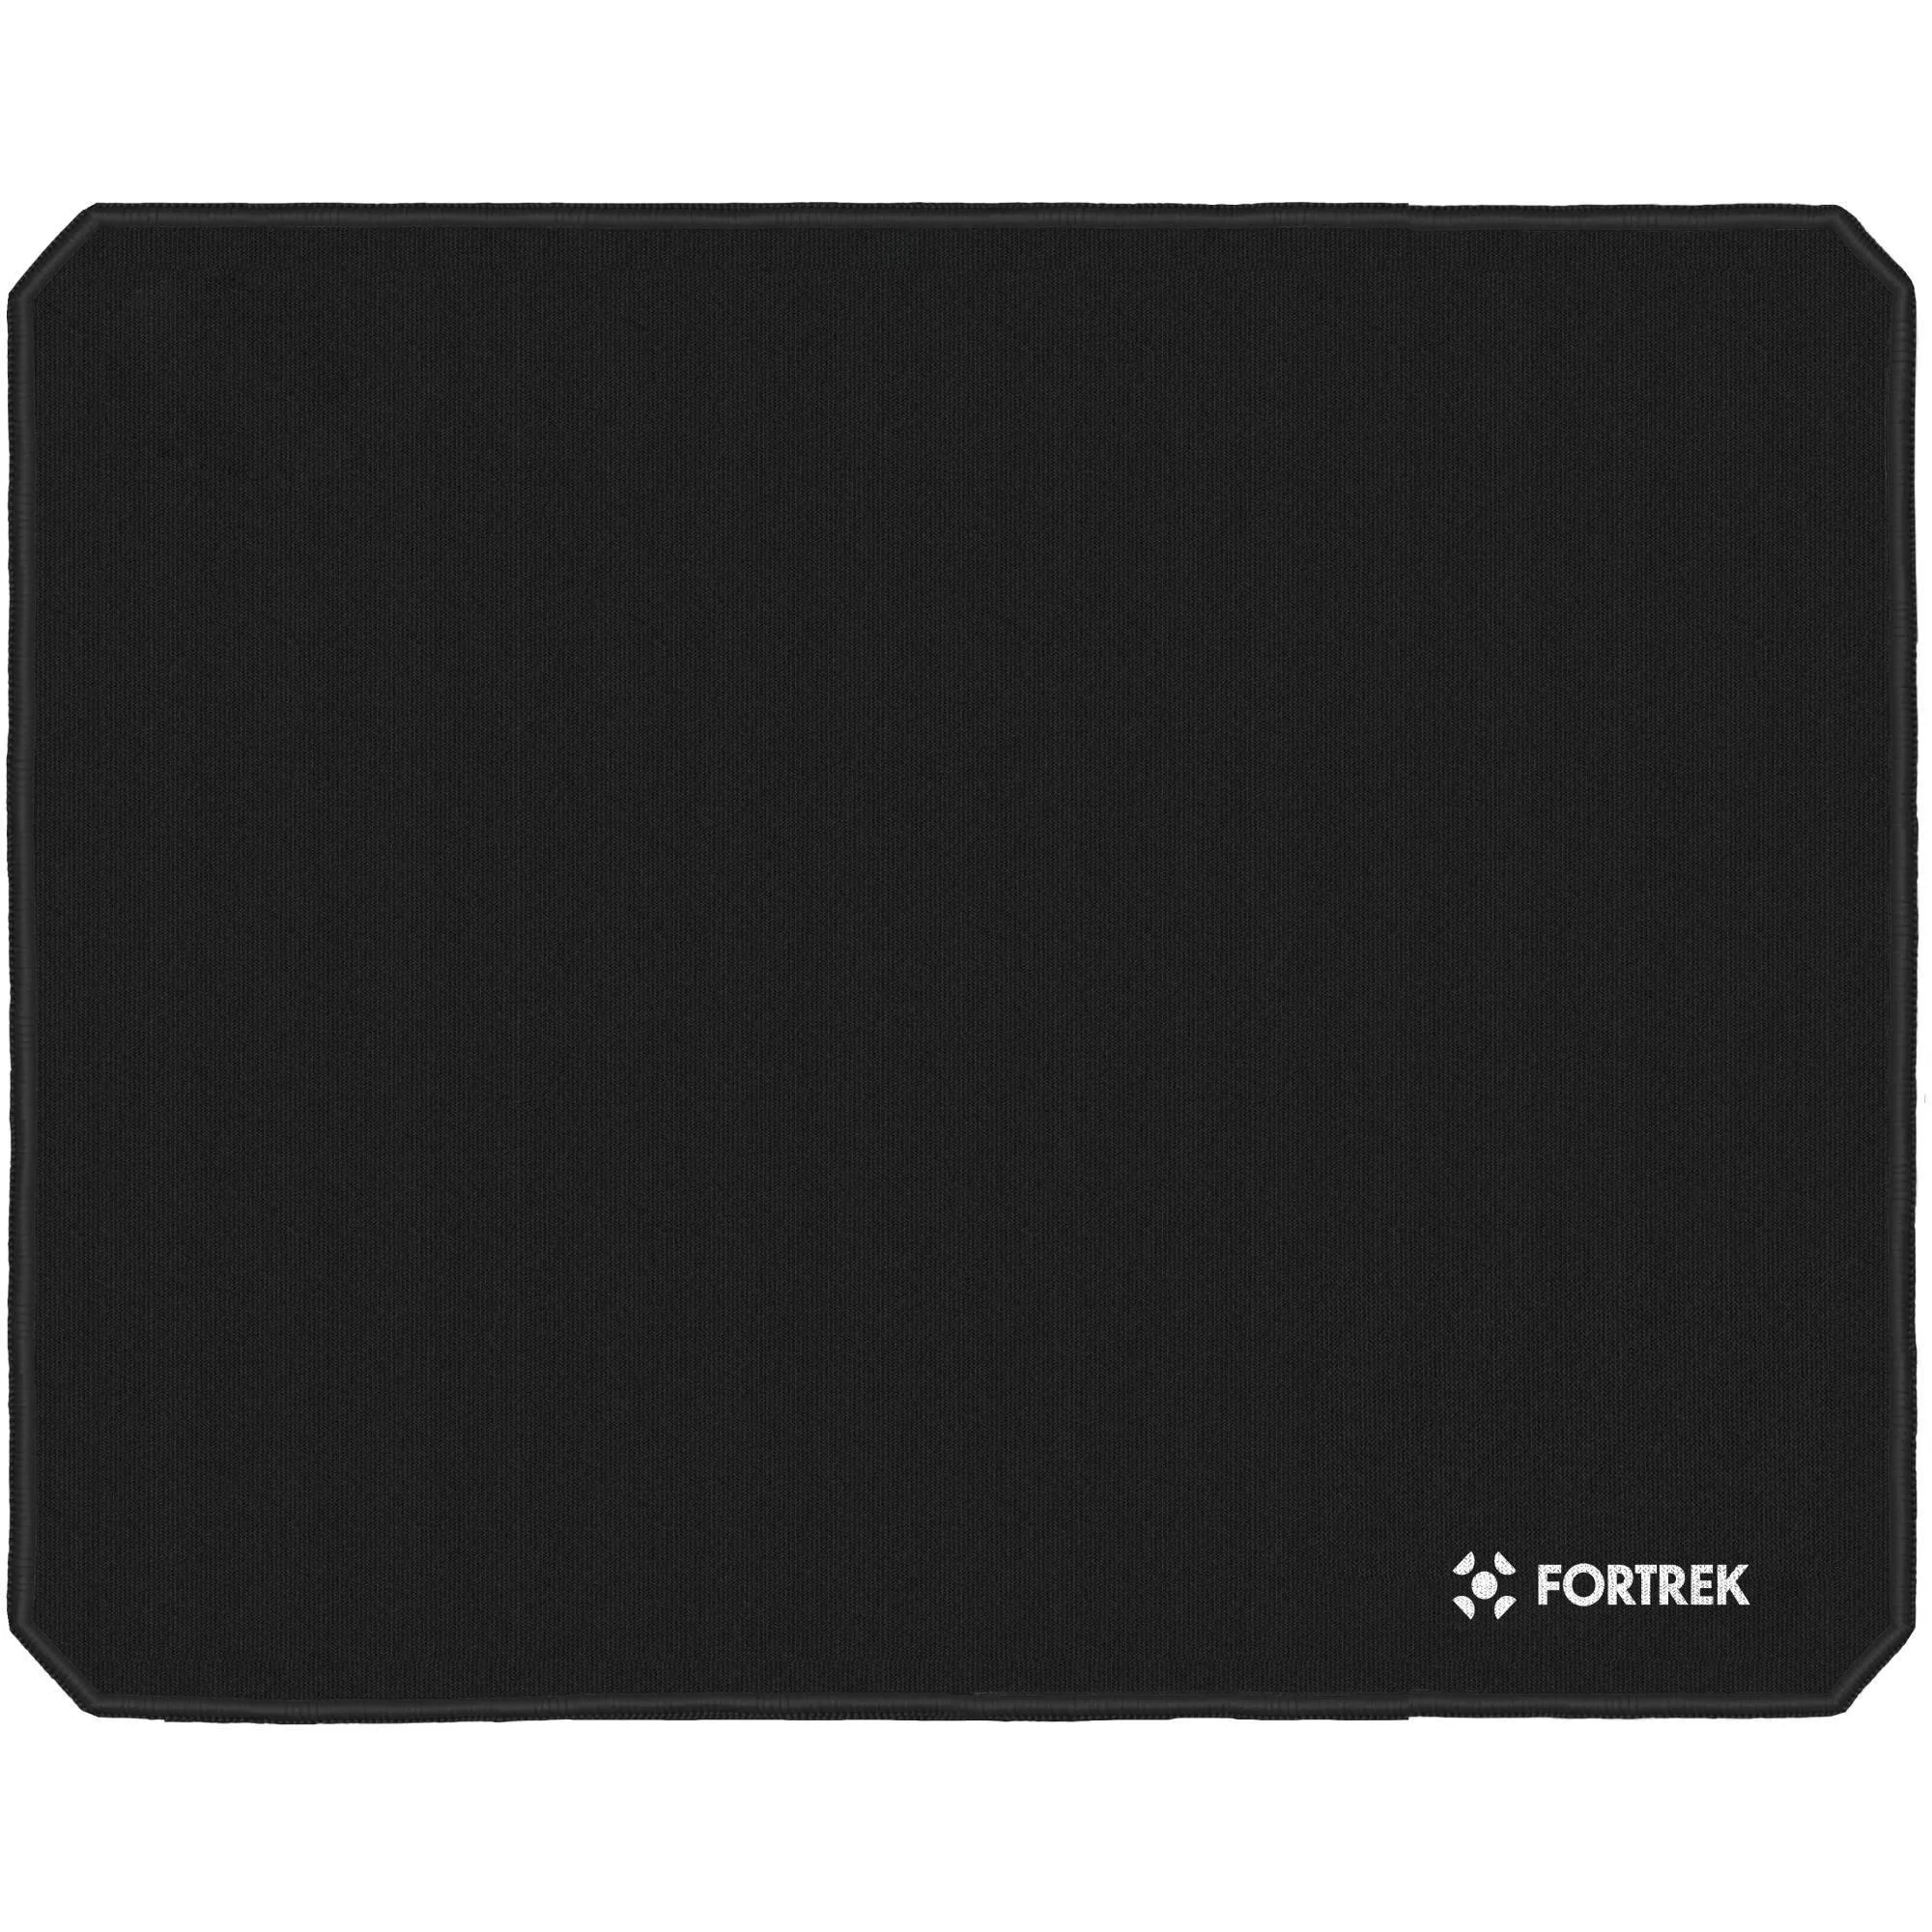 Mouse Pad Gamer Fortrek Speed MPG102 (350x440mm) Preto (77415)